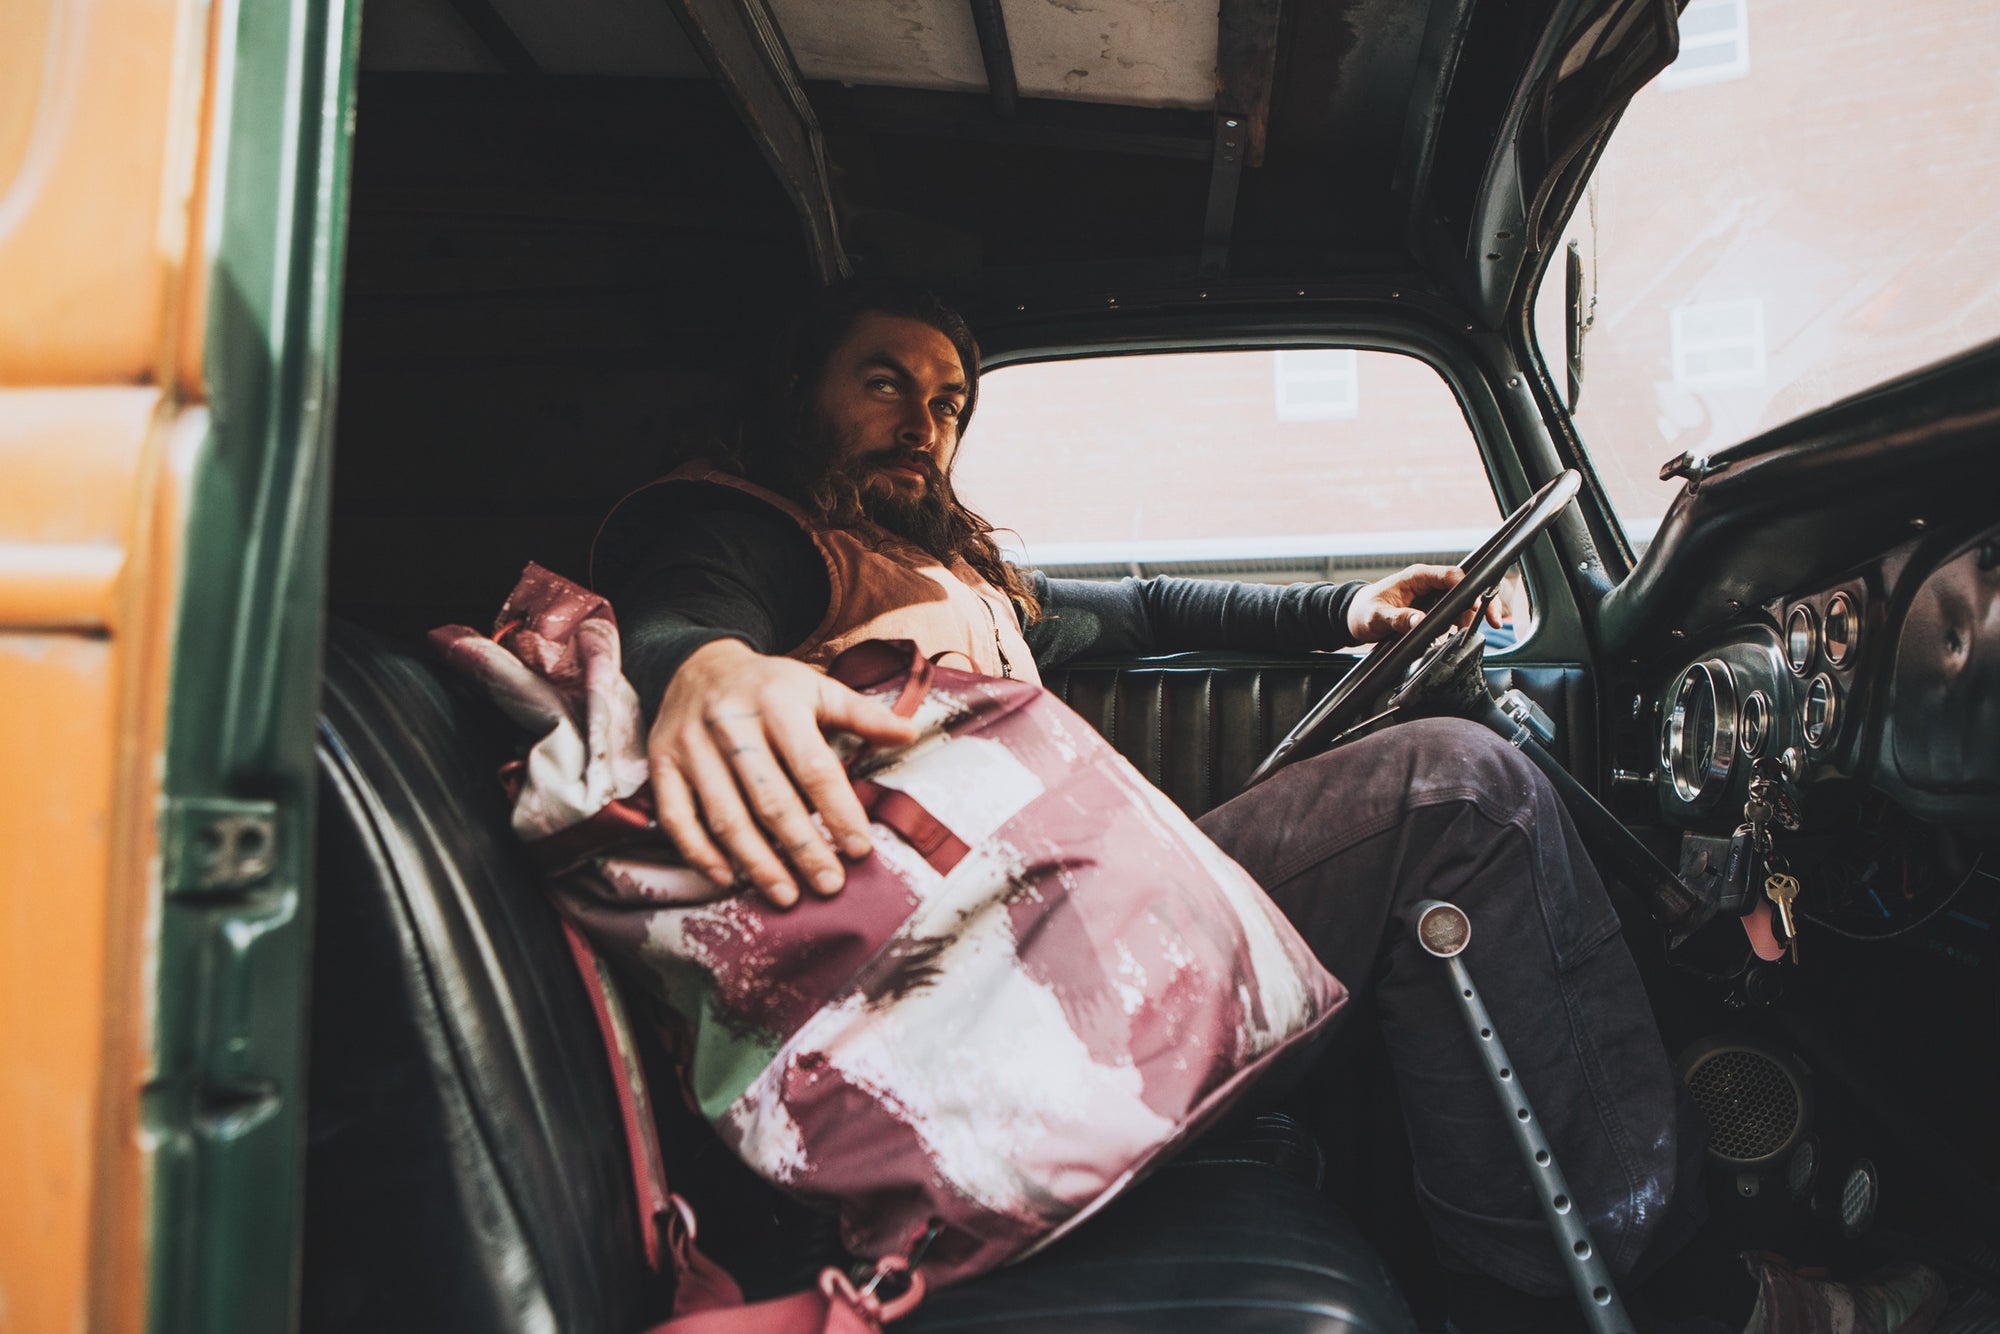 Jason Momoa is shown in an old car holding the So iLL x On The Roam eco camo 45L dirt bag is shown at elephant rocks state park